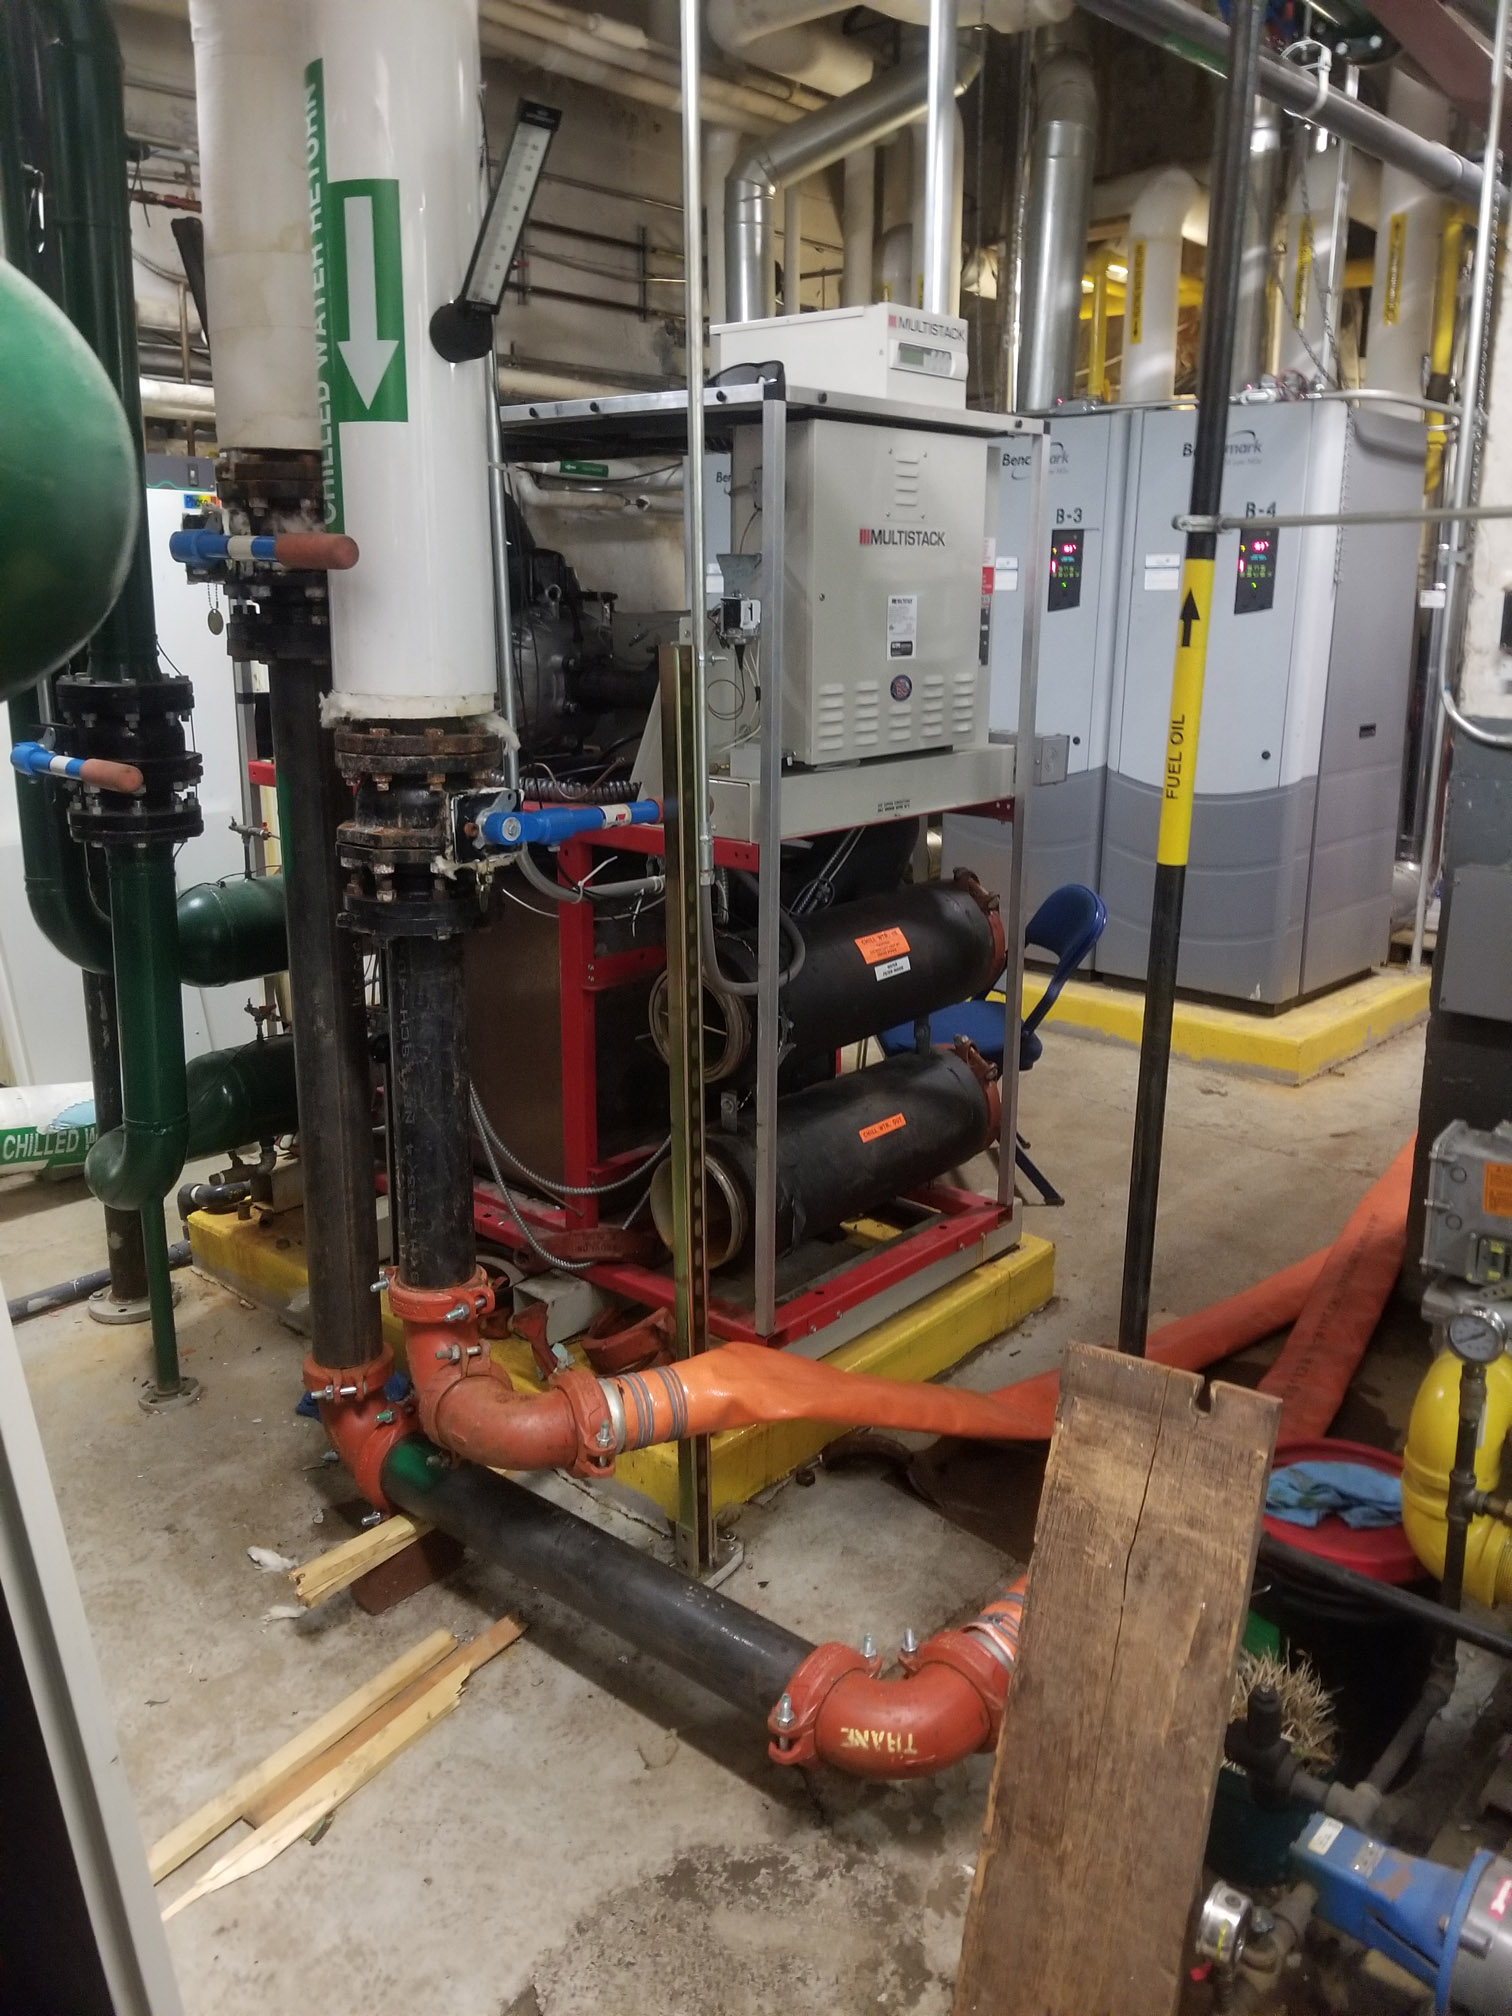 Air Cooled Chiller Rental Citrus County FL, Chiller AC Rental Citrus County FL, Temporary Chiller Citrus County FL, Rental Chiller Installation Citrus County FL